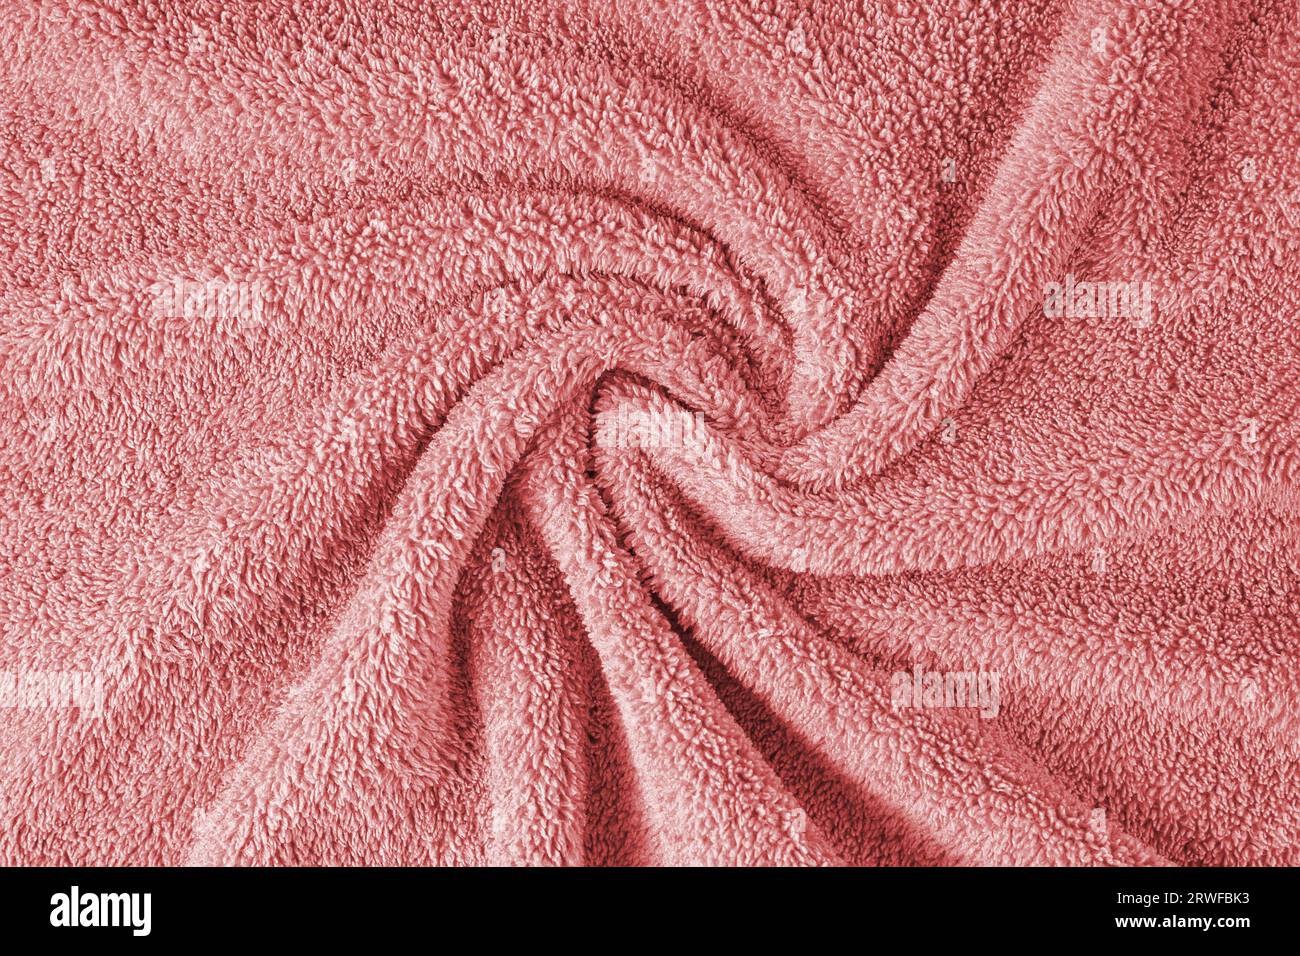 Terry cloth, red towel texture background. Wrinkled and crumped soft fluffy textile bath or beach towel material. Top view, close up. Stock Photo